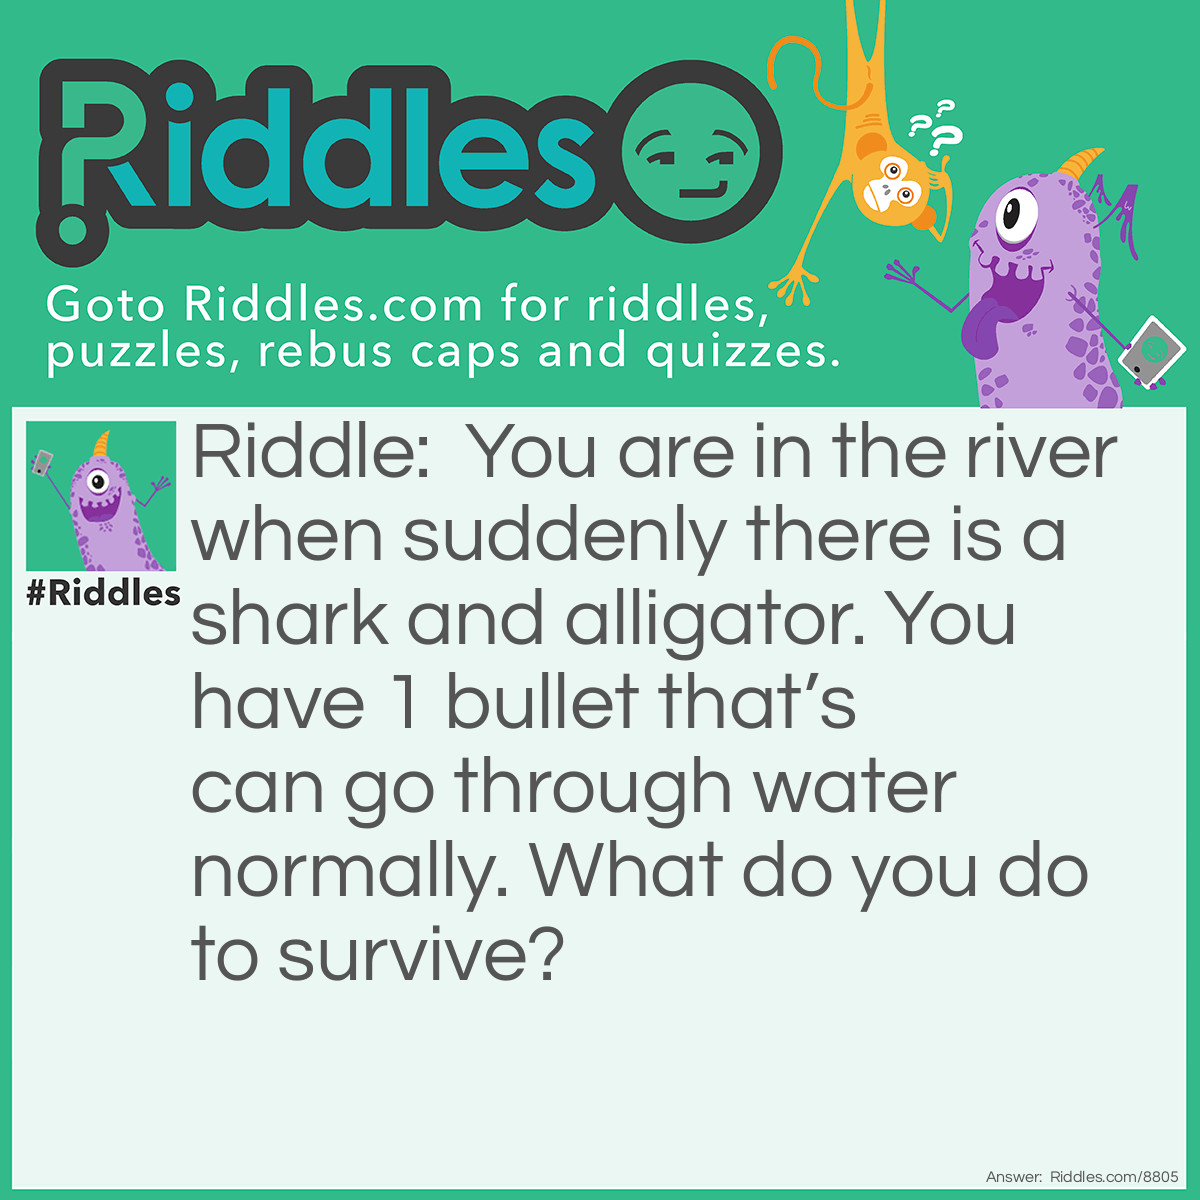 Riddle: You are in the river when suddenly there is a shark and alligator. You have 1 bullet that's can go through water normally. What do you do to survive? Answer: You shoot the alligator because there are no sharks in a rivers.